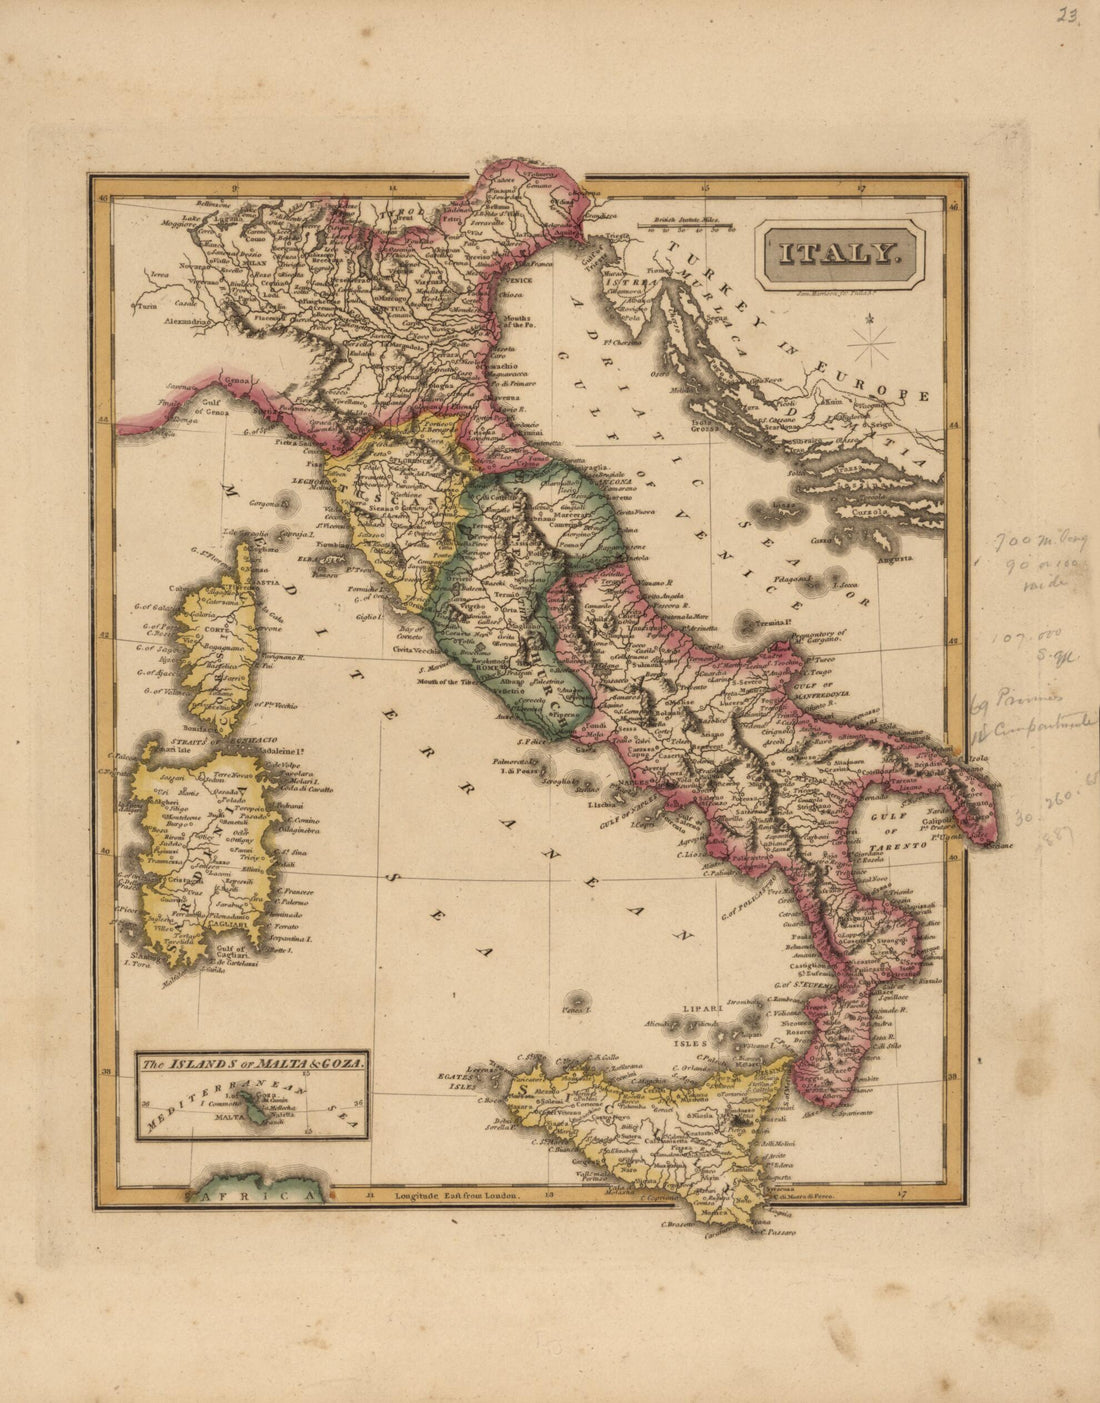 This old map of Italy from a New and Elegant General Atlas, Containing Maps of Each of the United States. from 1817 was created by Henry Schenck Tanner in 1817